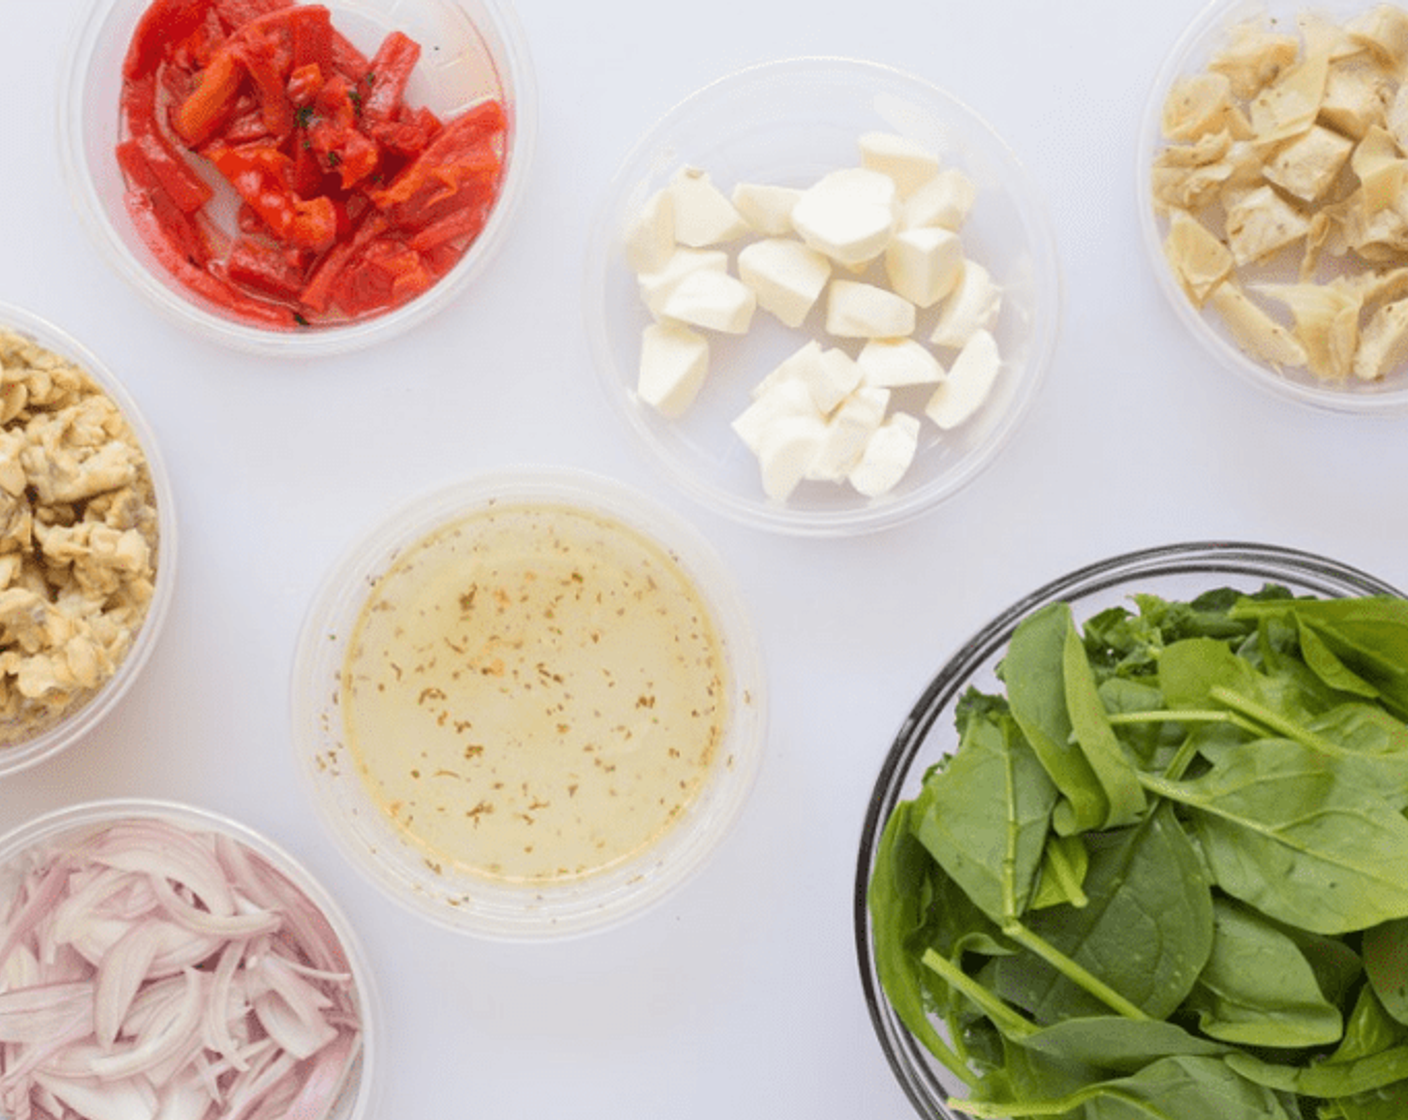 step 3 Prepare your mise en place: Crumble Tempeh (1 1/3 cups). Peel and thinly slice Shallot (1/3 cup). Cut or tear Leafy Greens (2 3/4 cups) into bite-size pieces. Remove Artichoke Hearts (1/2 cup) from the jar, and reserve liquid.